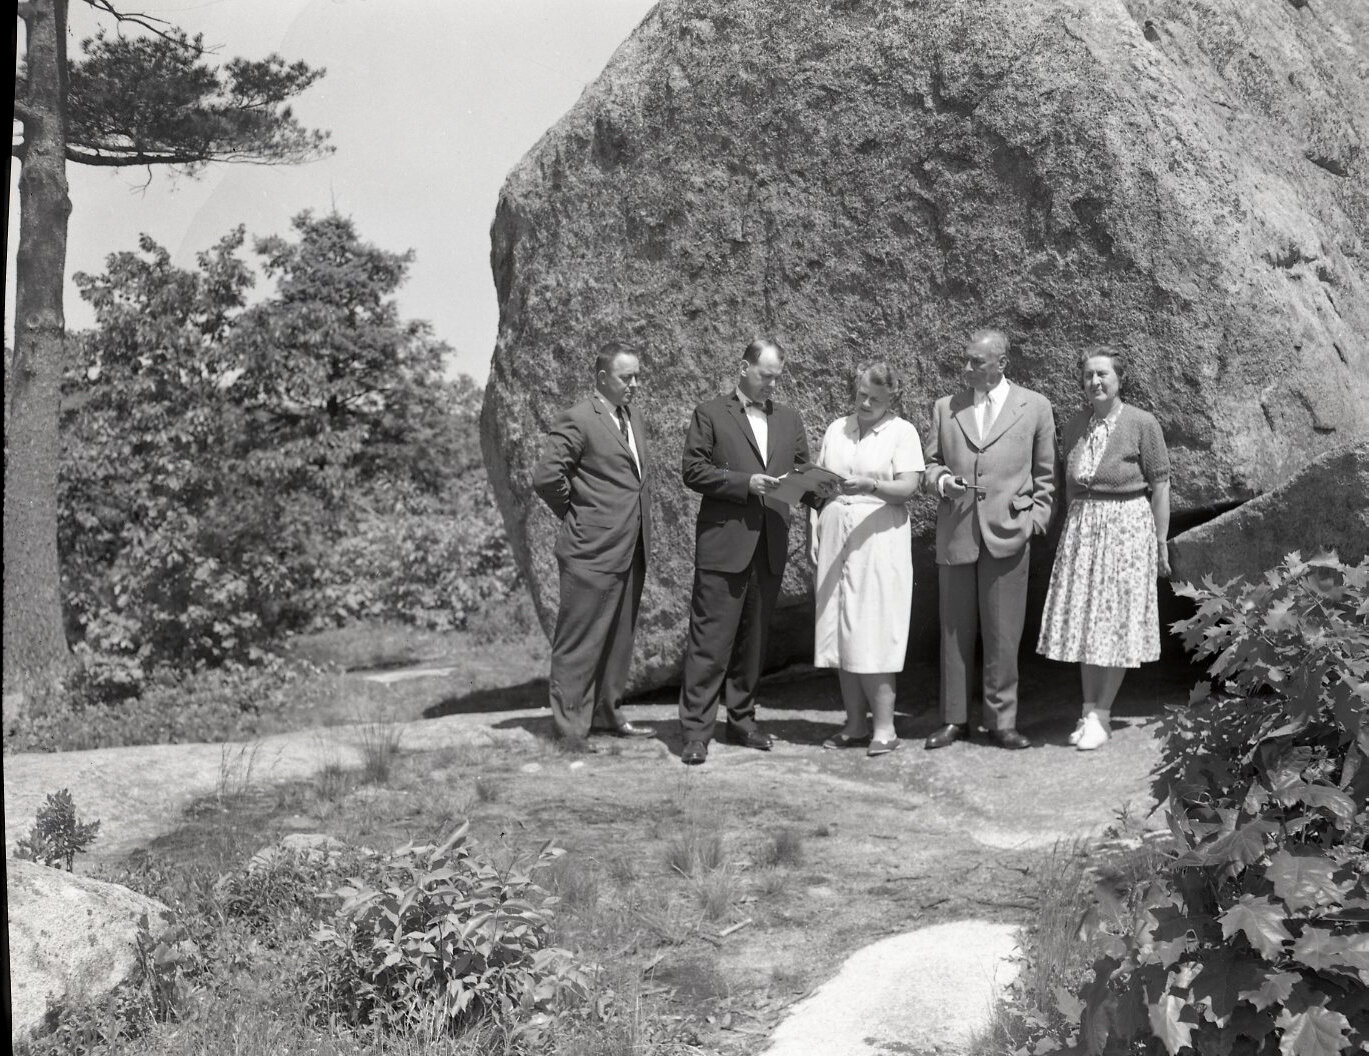 A group of Agassiz’ students named Agassiz Rock property in the 1870s.  In 1957, it was acquired by the Trustees of Reservation. Here, far left, Daniel F. Slade (publisher/editor of the Manchester Cricket) and Francis L. “Quitsie” Burnette (middle) a Manchester environmentalist. (Photo: The Cricket)